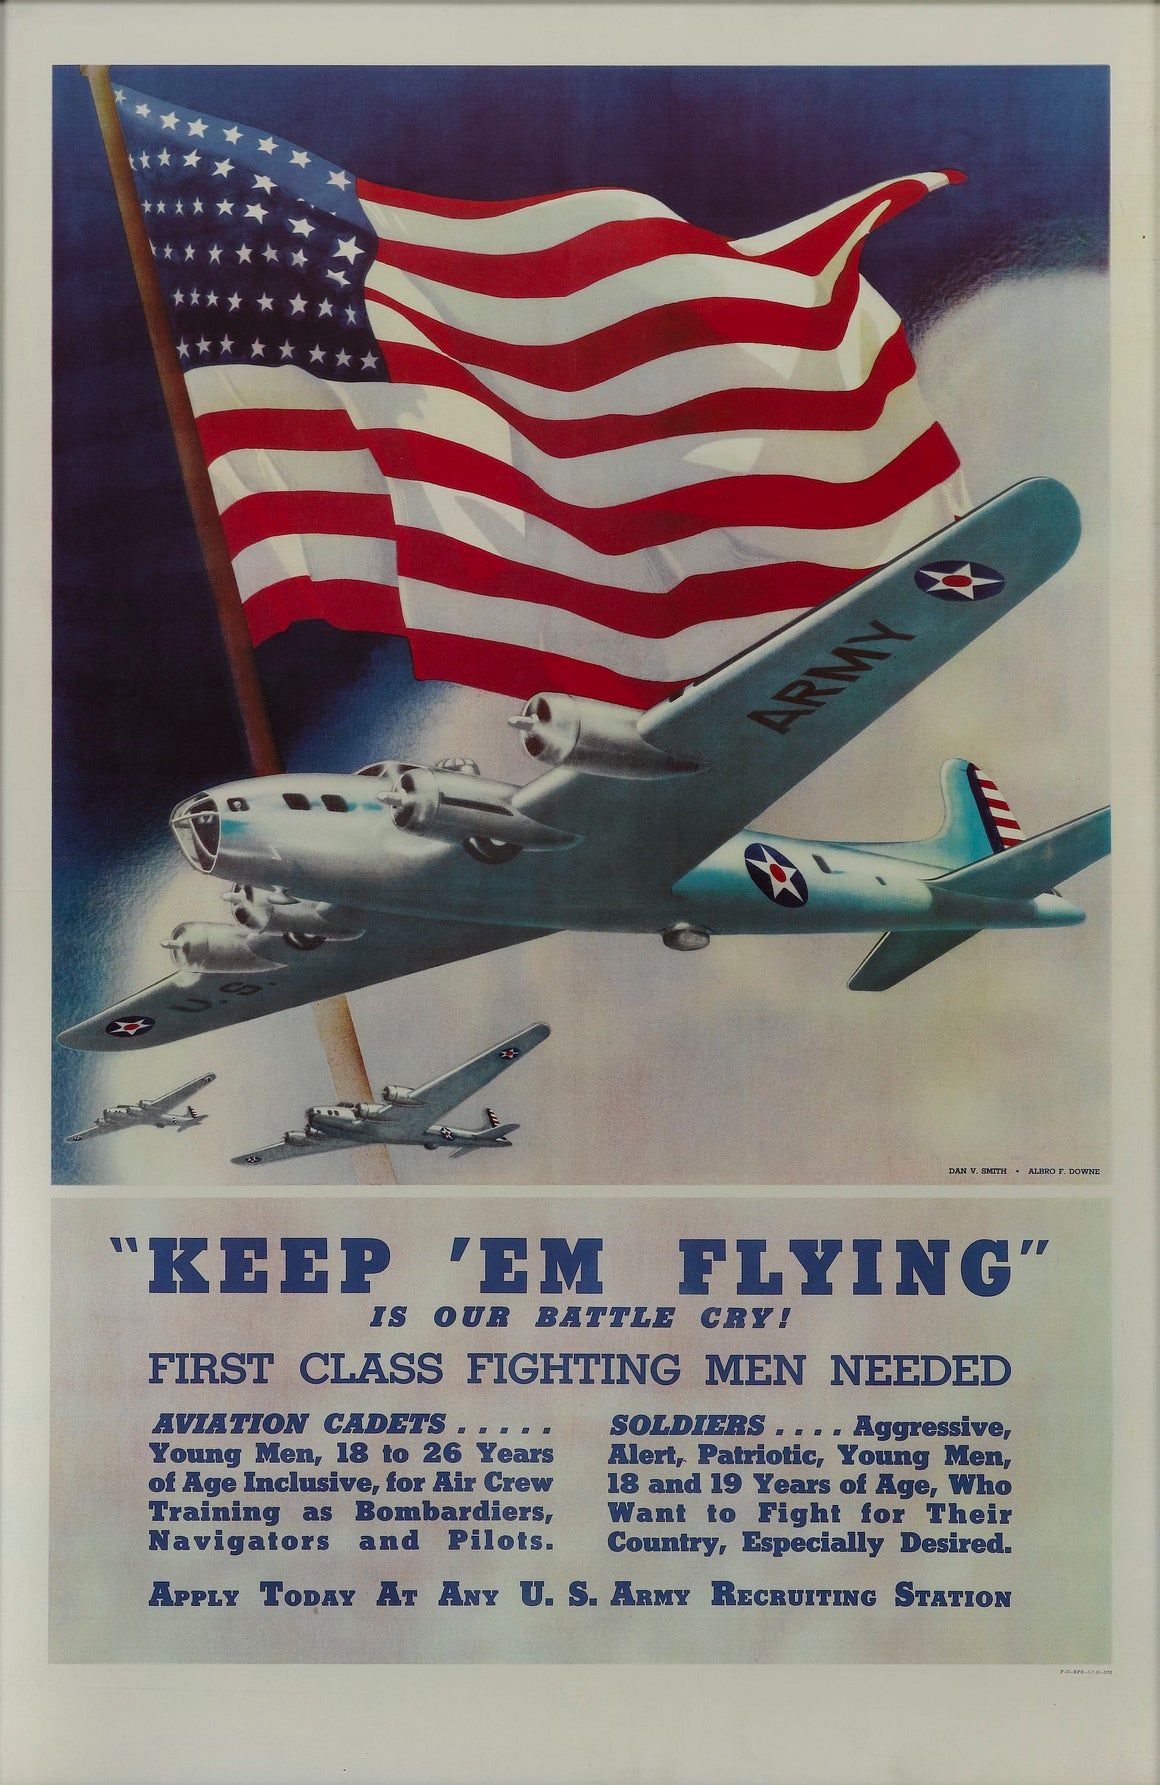 "'Keep 'Em Flying' is our Battle Cry!" Vintage WWII Army Recruitment Poster by Smith and Downe, 1942